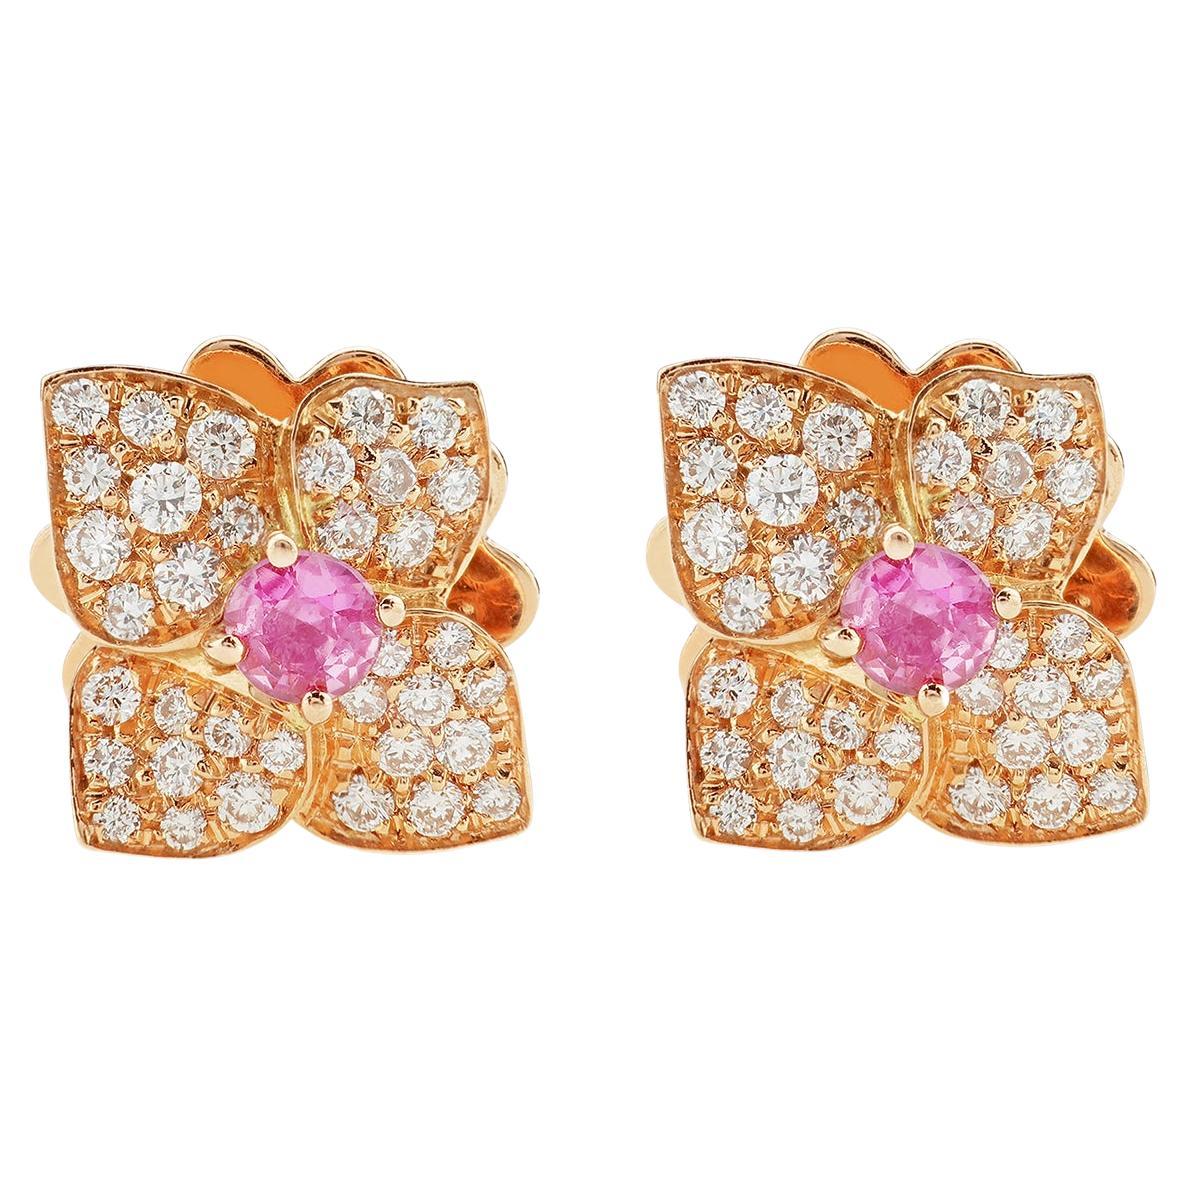 18 Carat Rose Gold, Diamonds and Pink Sapphires, Ortensia Earrings Leonori For Sale